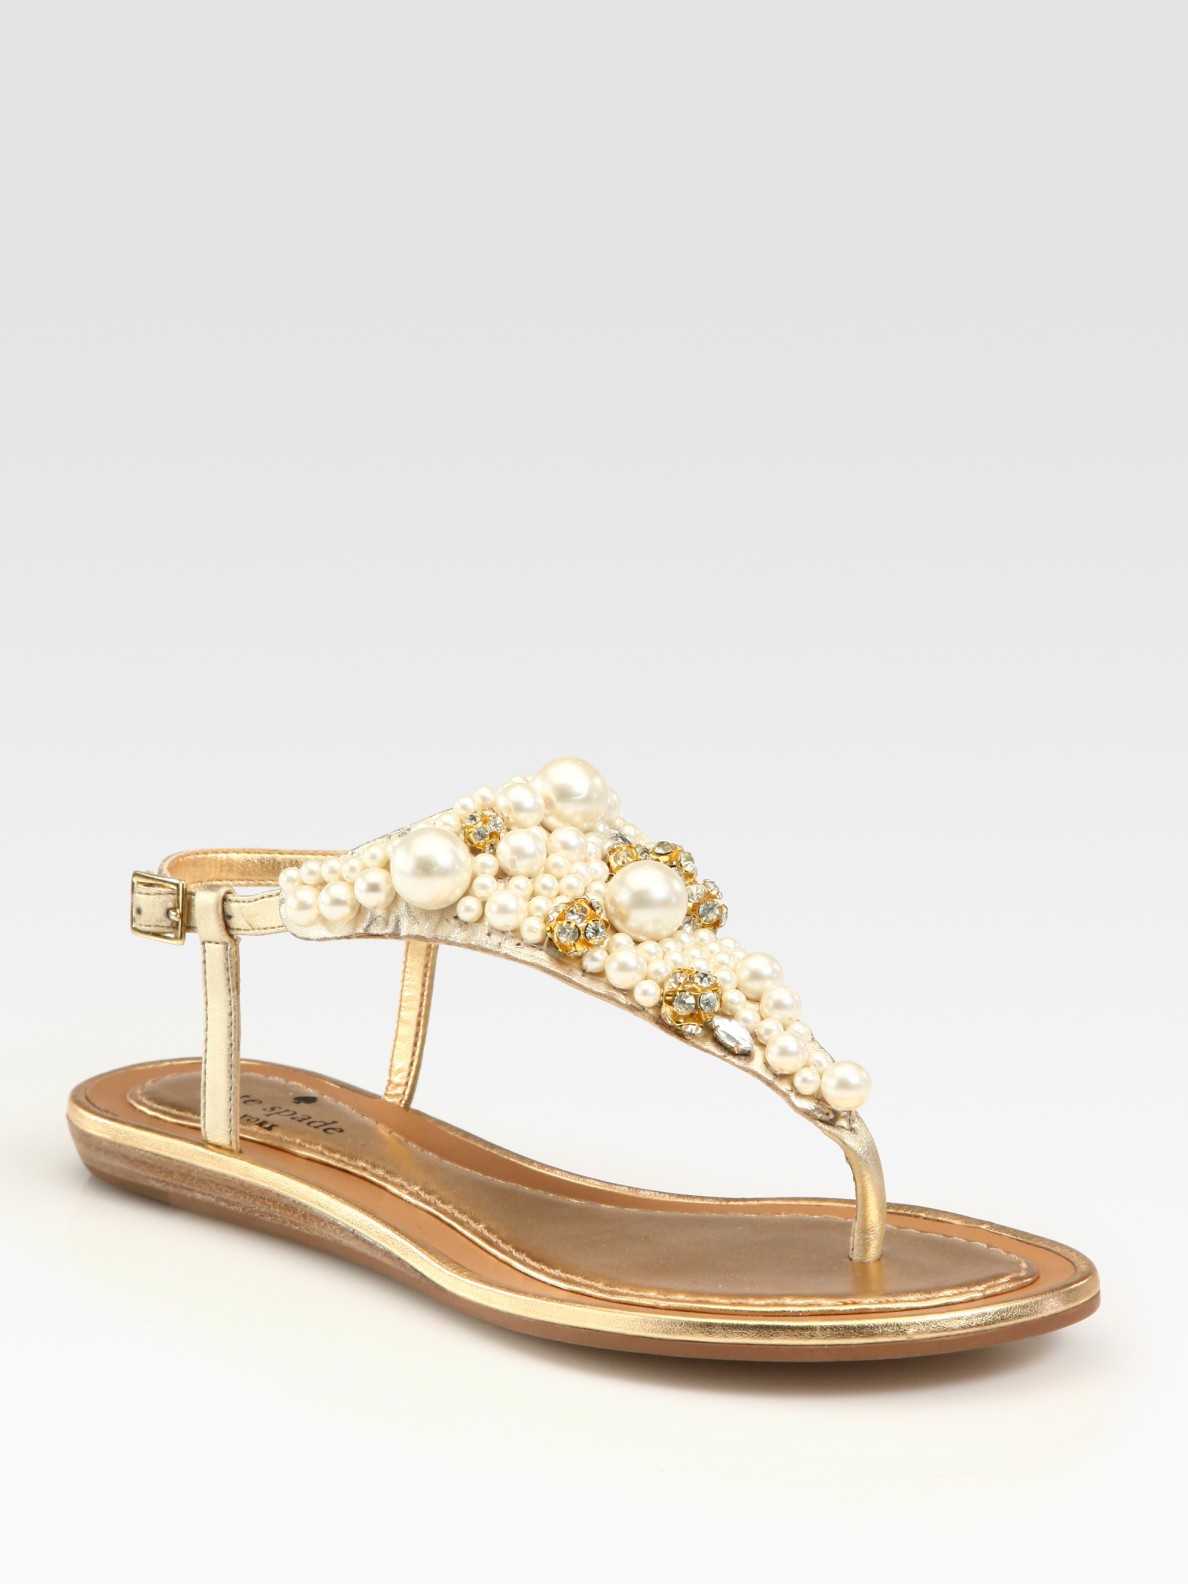 Kate spade new york Embellished Metallic Leather Thong Sandals in ...